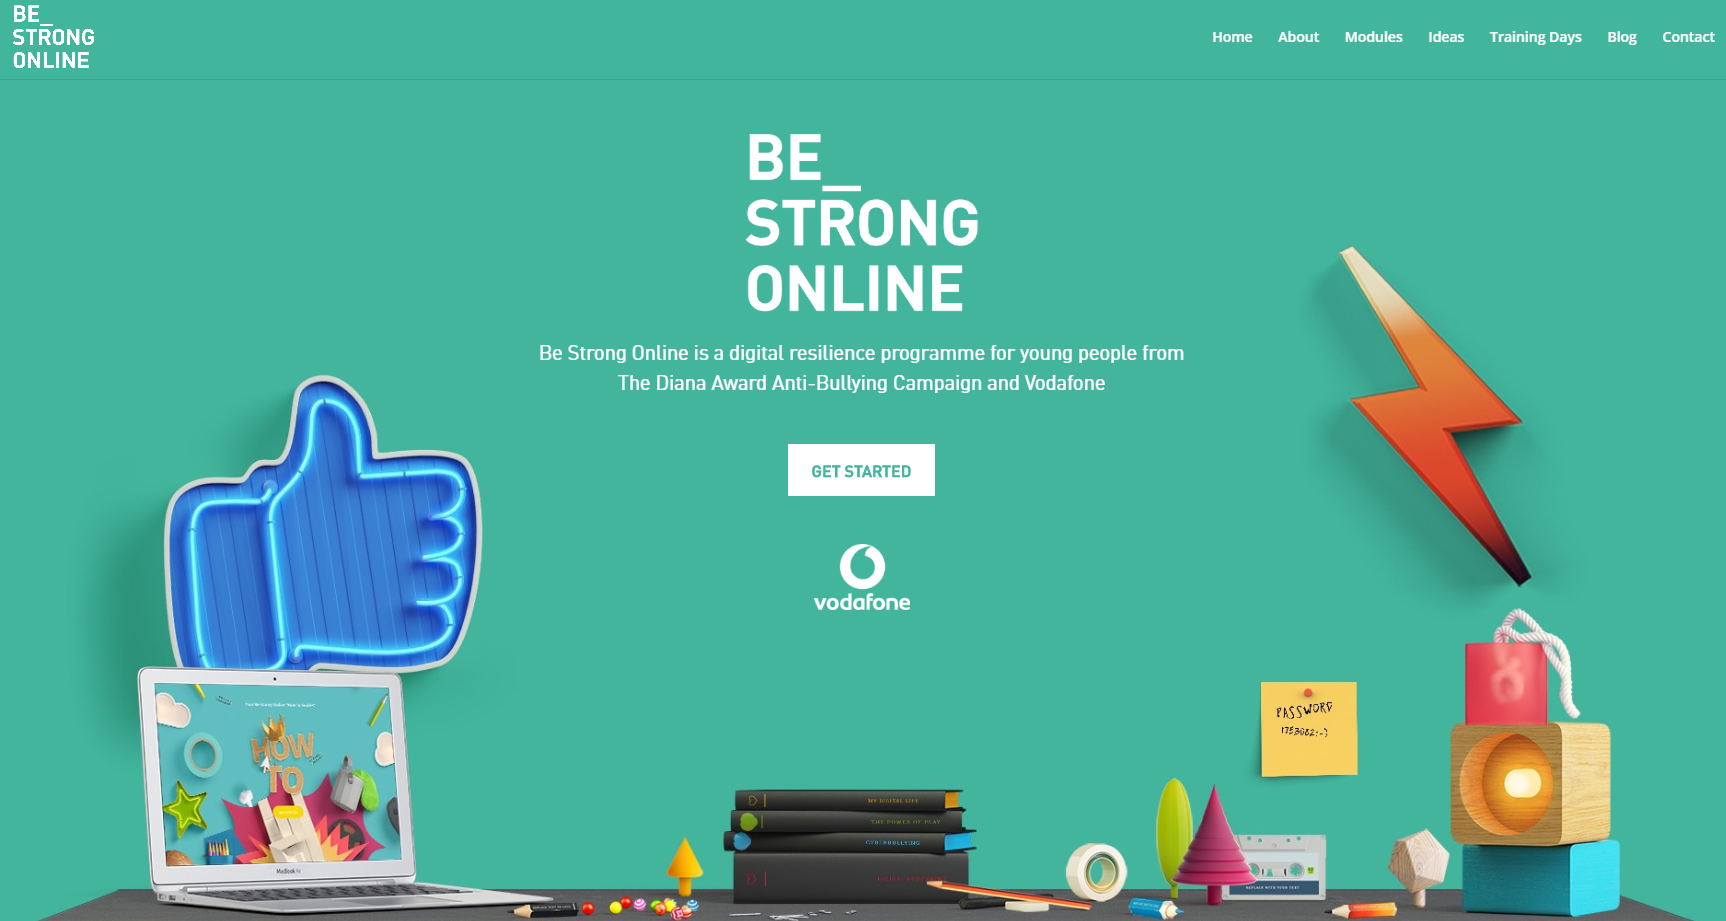 Be strong online